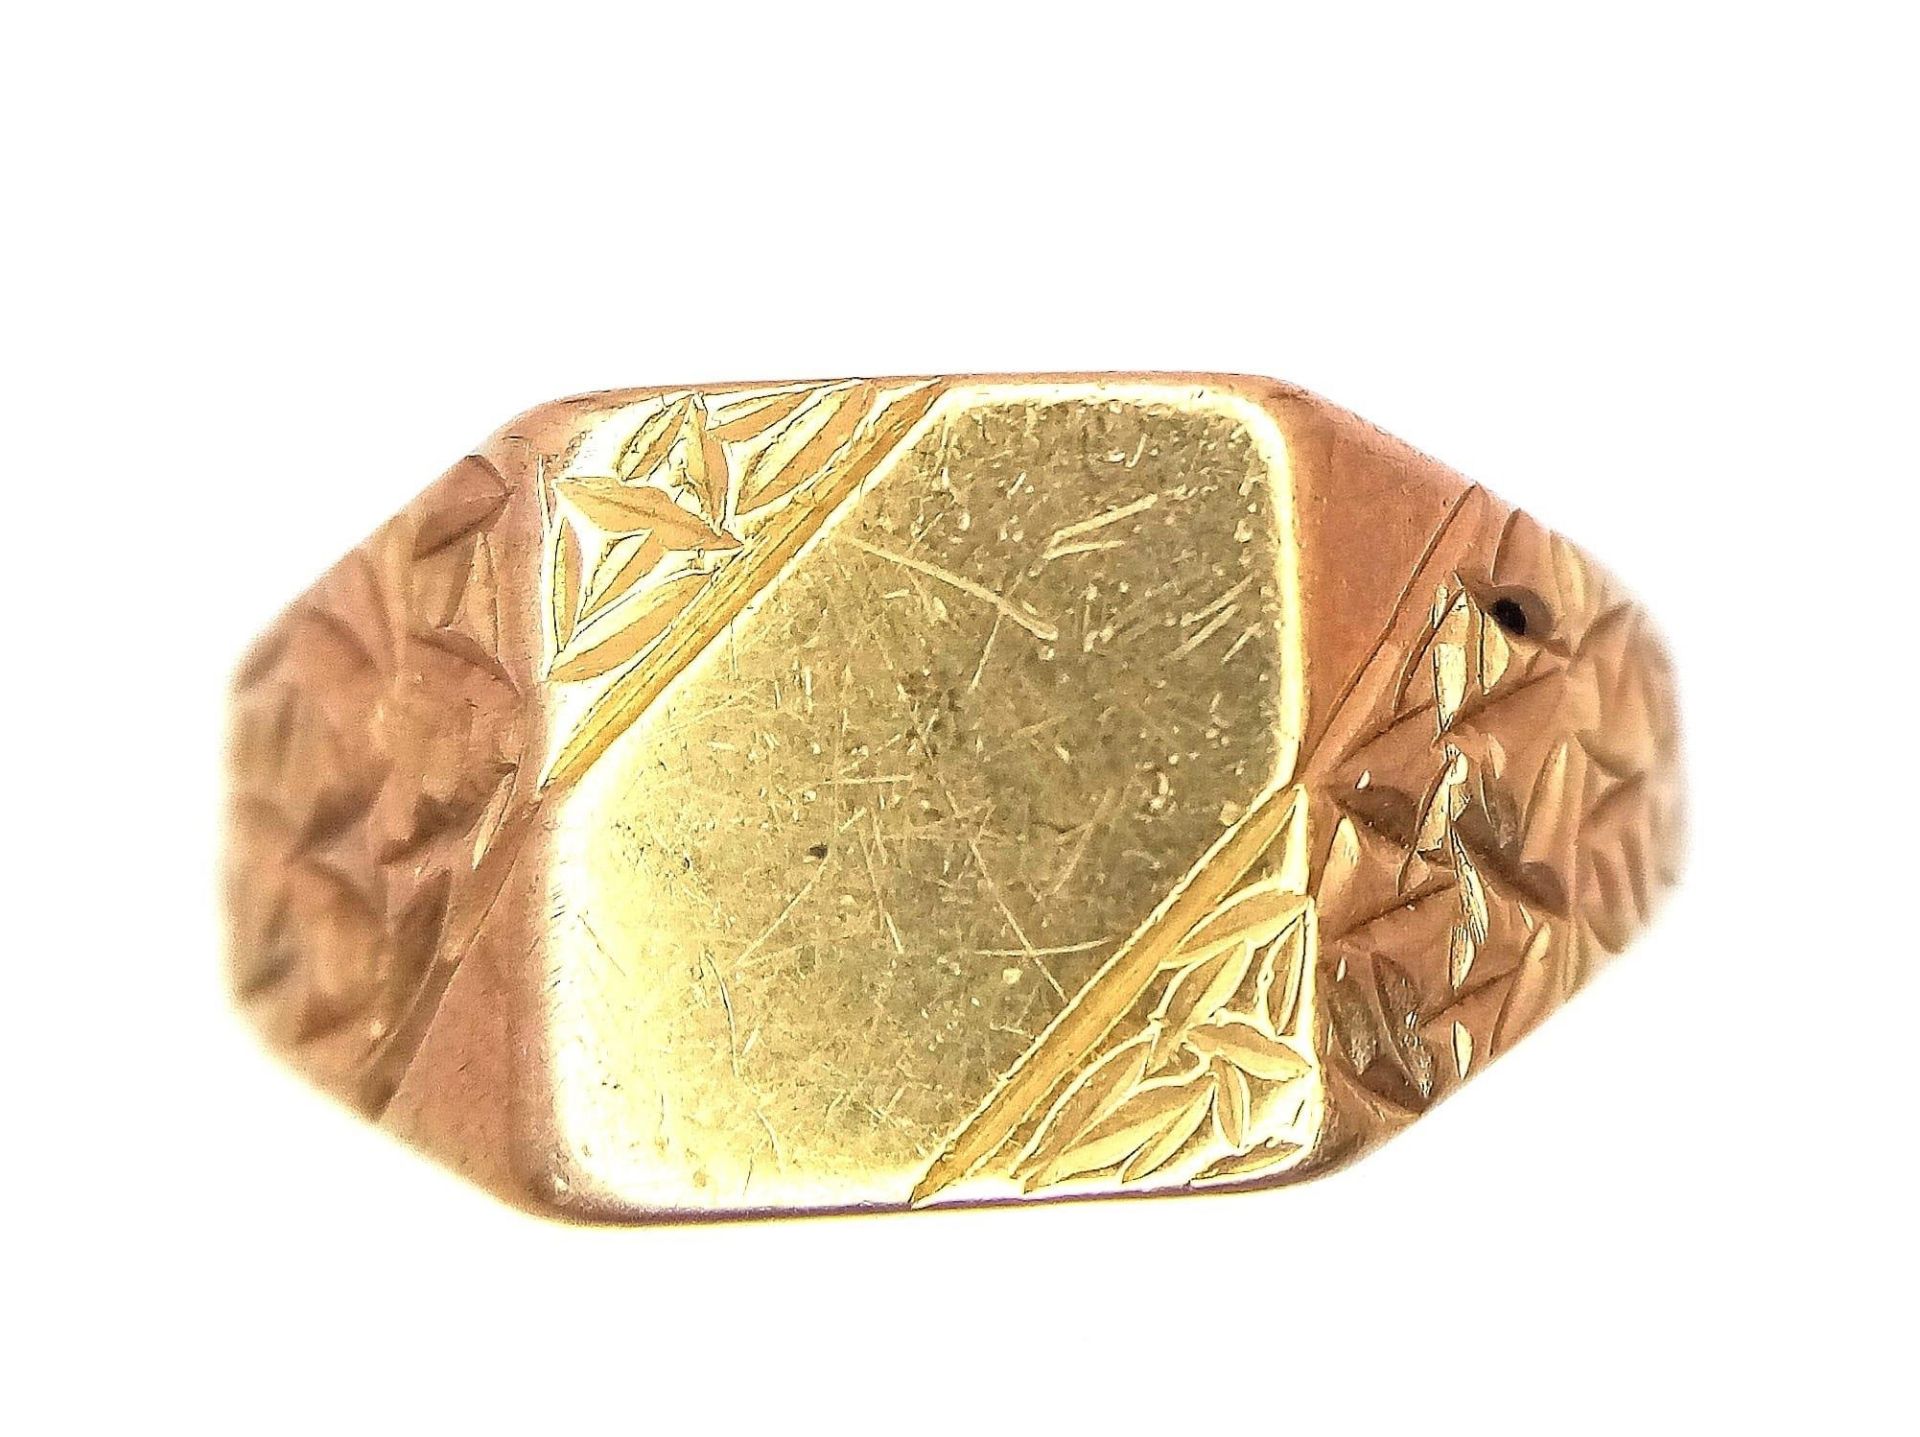 A Vintage 9K Yellow Gold Signet Ring. Size Q 1/2. Full UK hallmarks. 3.42g weight. - Image 2 of 5